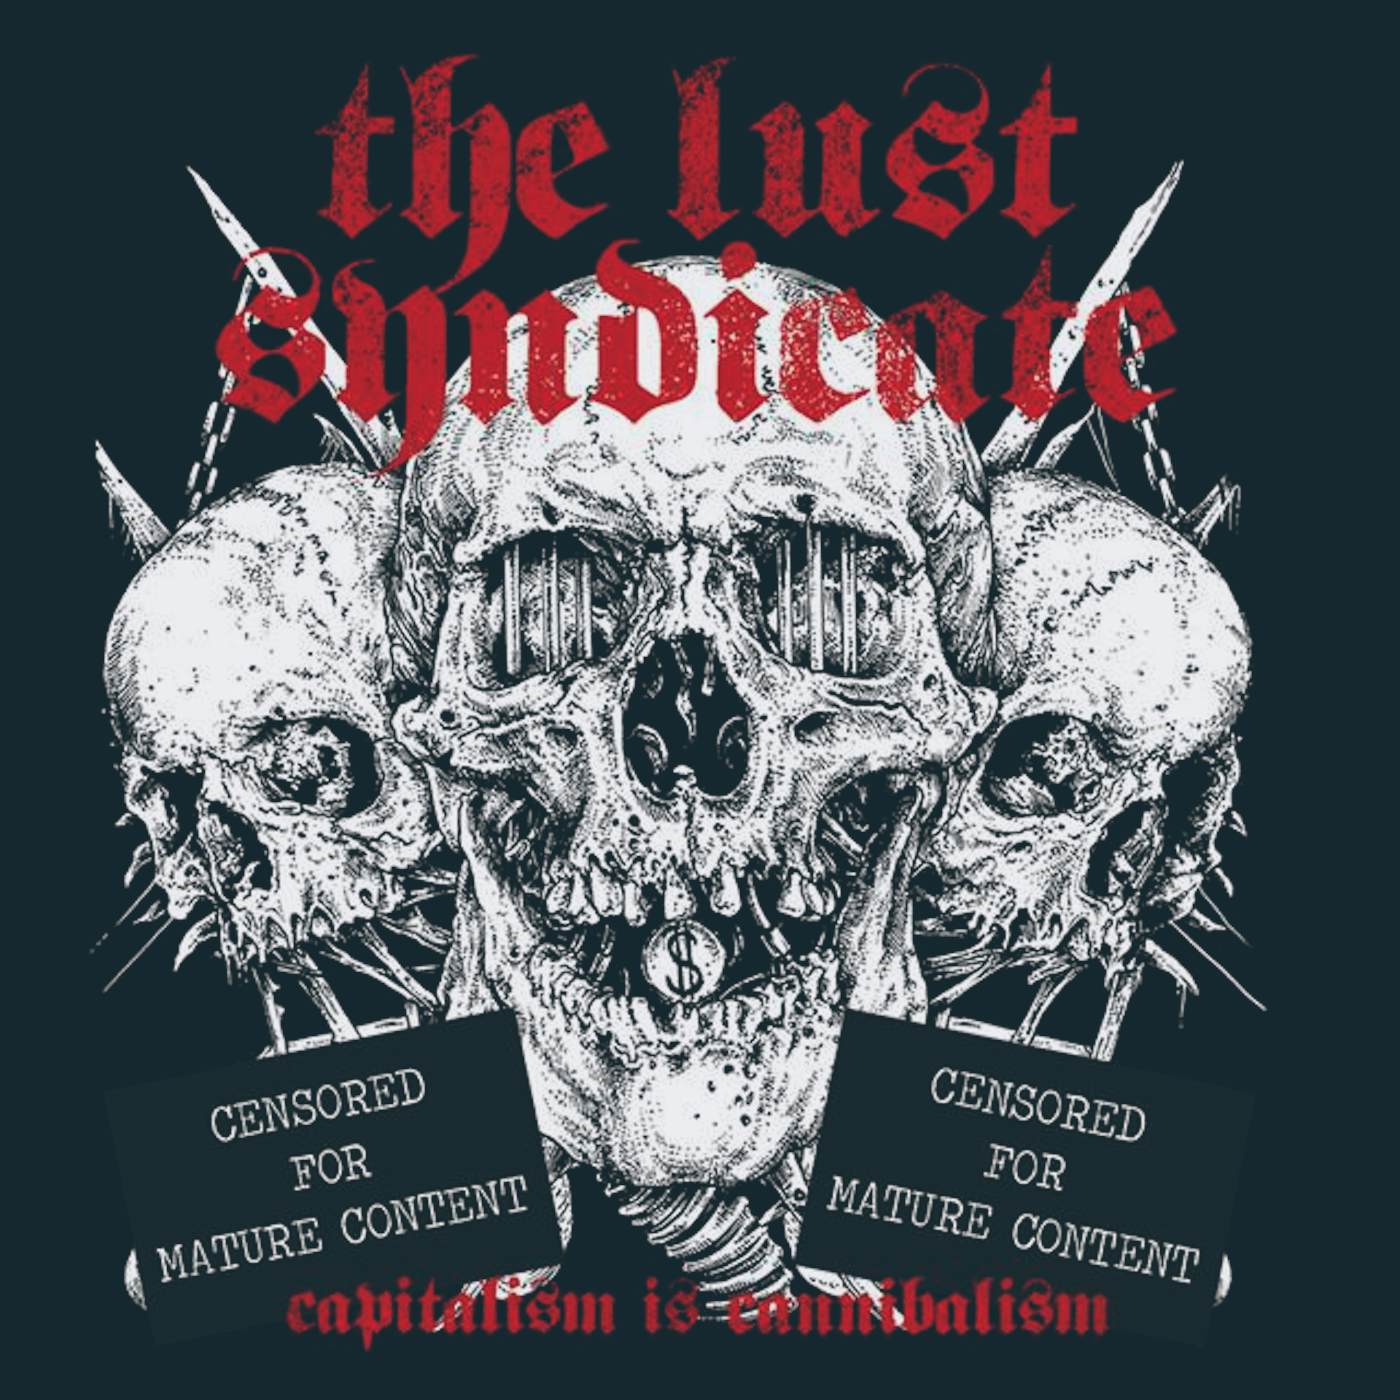 The Lust Syndicate